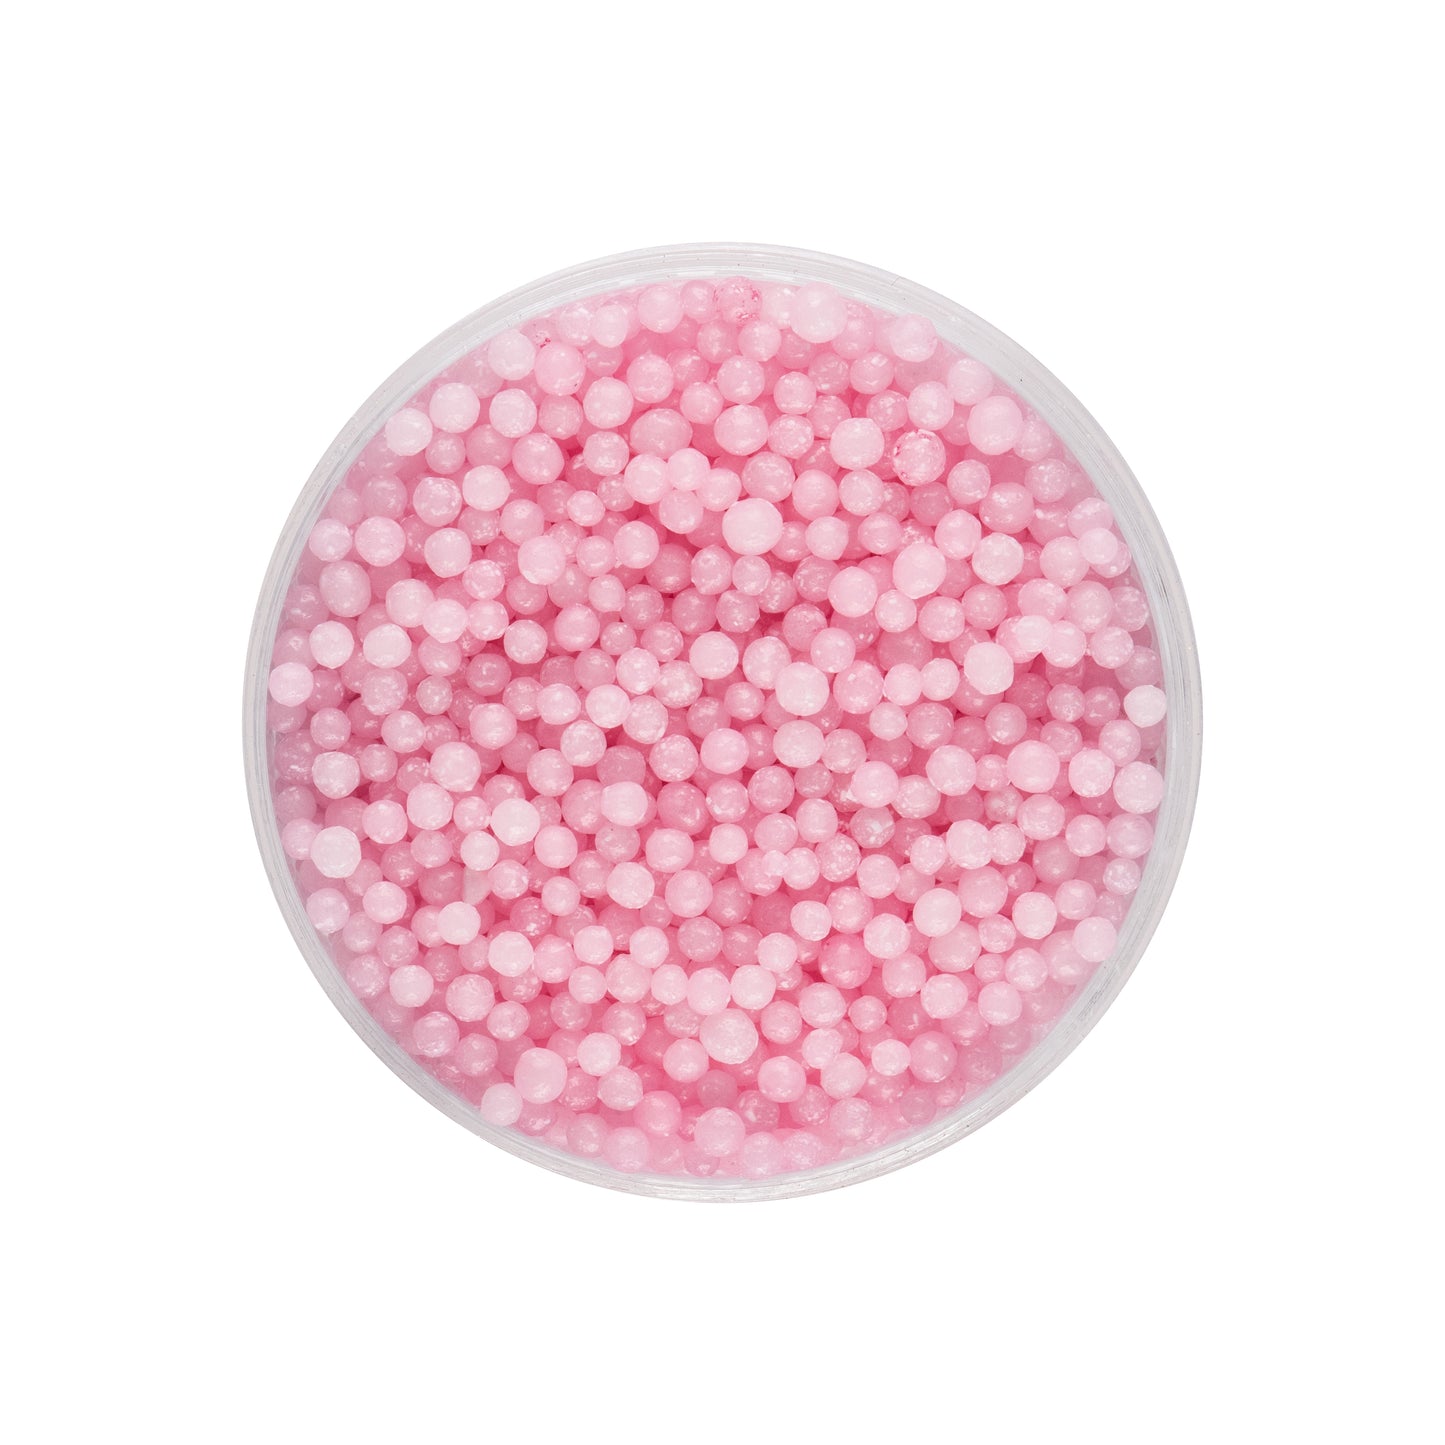 Over The Top Non Pareils Sprinkles - Pink 60g